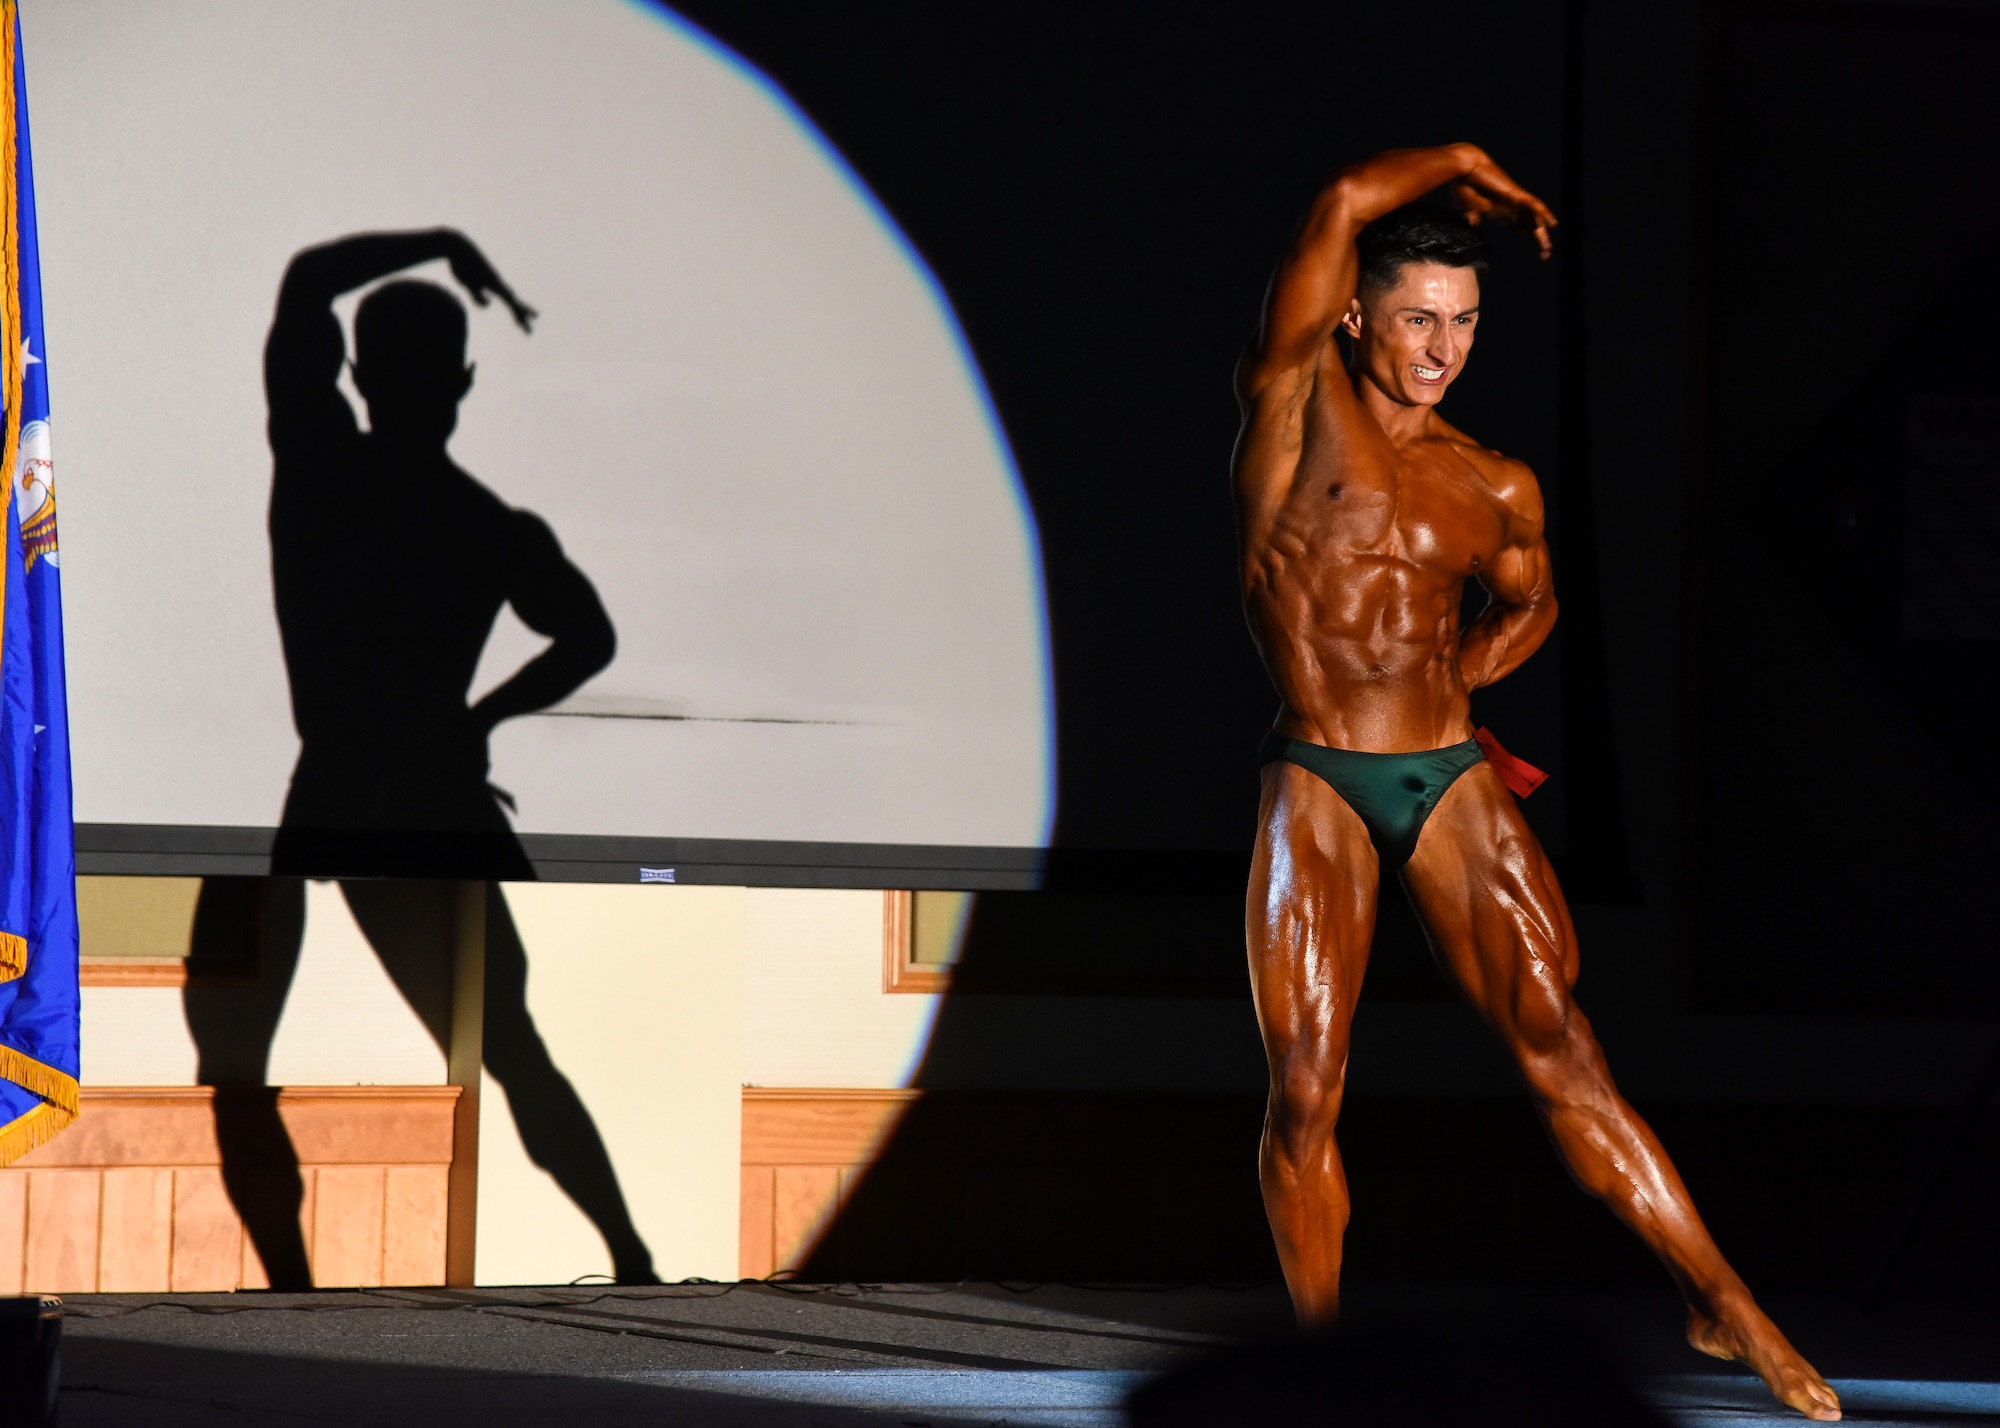 Senior Airman Christopher Almaraz, 819th RED HORSE Squadron structural journeyman, poses during a bodybuilding competition held at Malmstrom Air Force Base’s Grizzly Bend, Mont., May 8. Almaraz prepared for the competition by following a strict diet, working out three times a day and practicing his posing for ten weeks prior to the event. (U.S. Air Force photo/Airman 1st Class Collin Schmidt) 